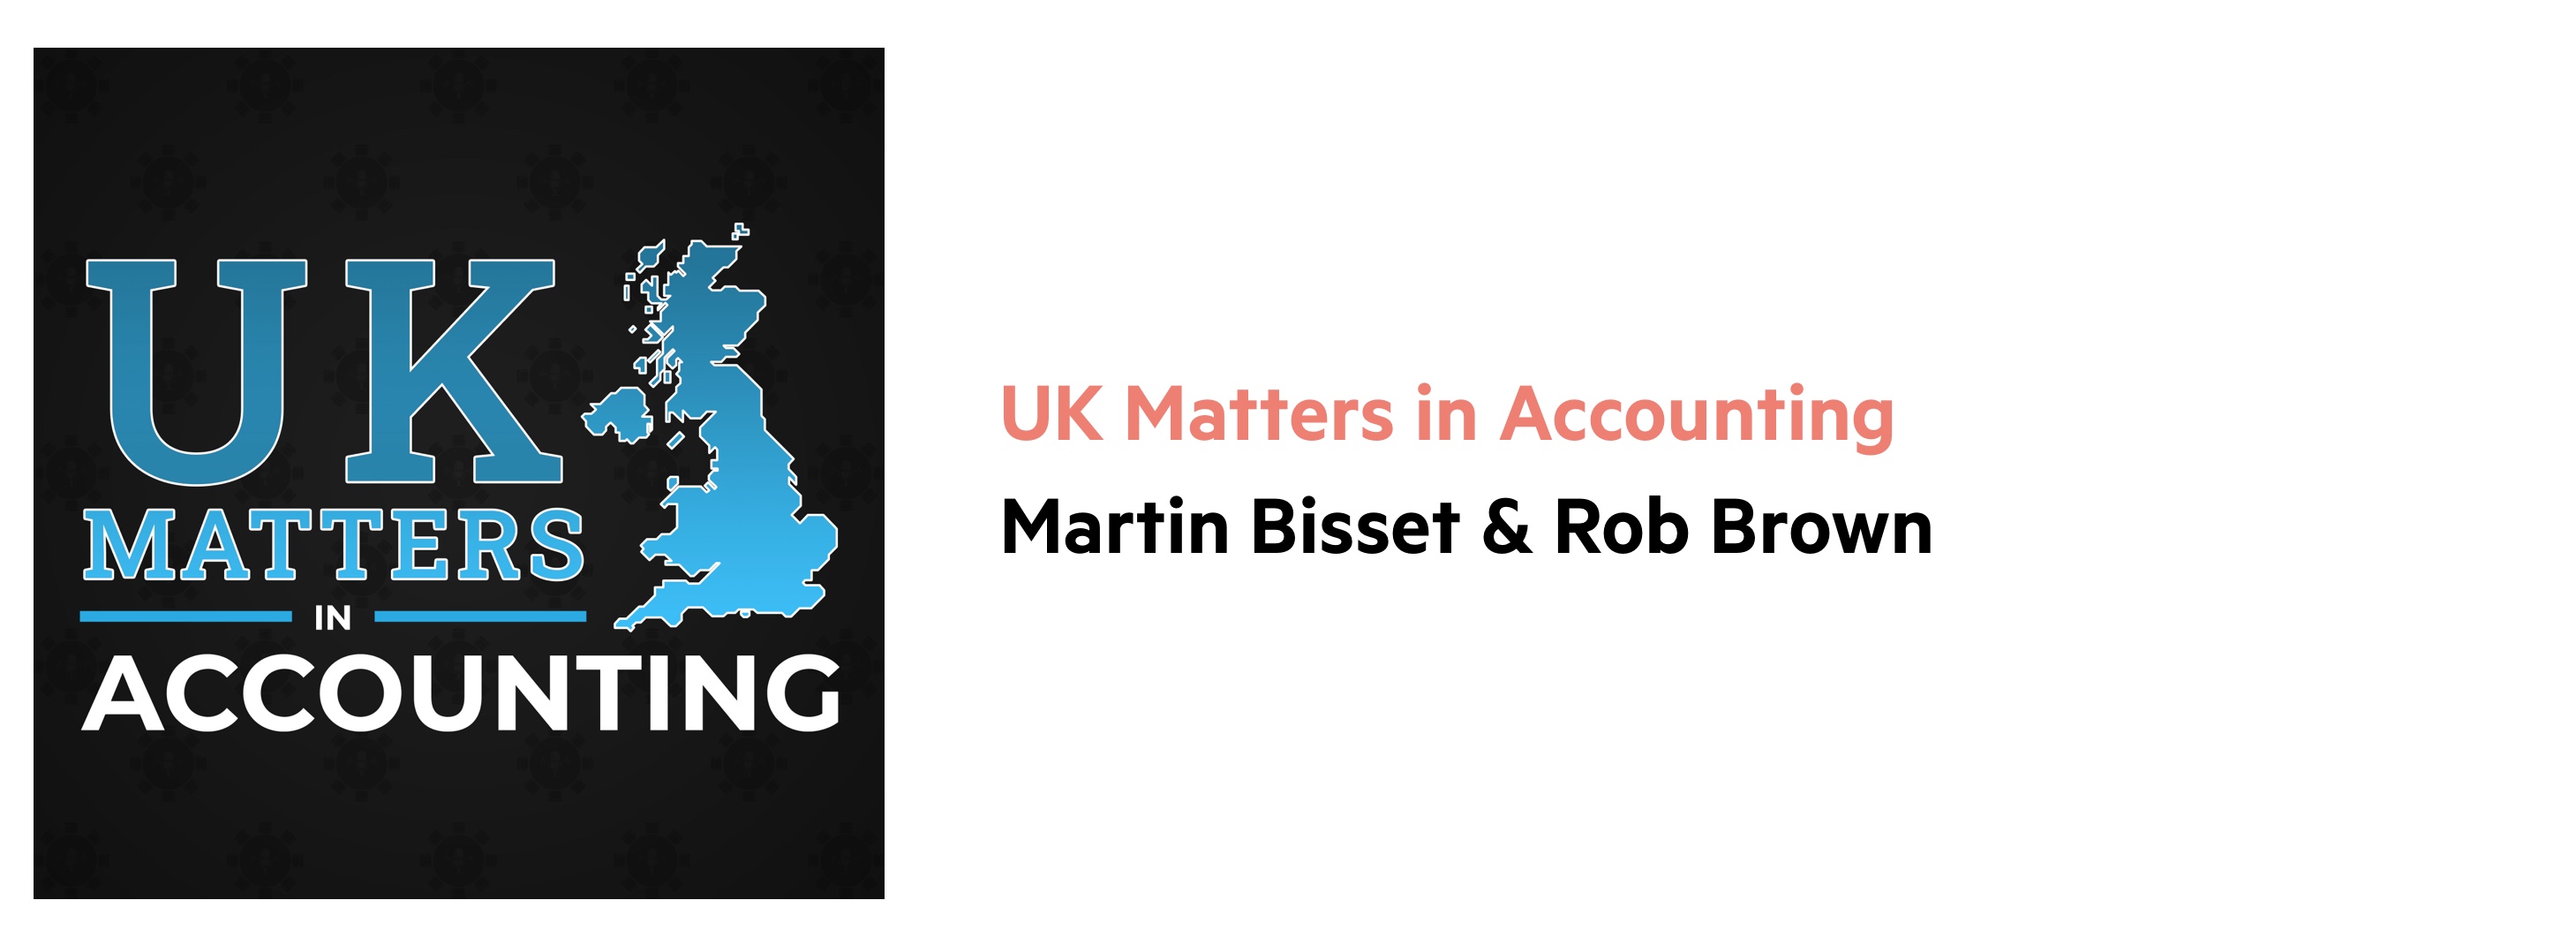 UK Matters in Accounting podcast logo, which includes the map of England.